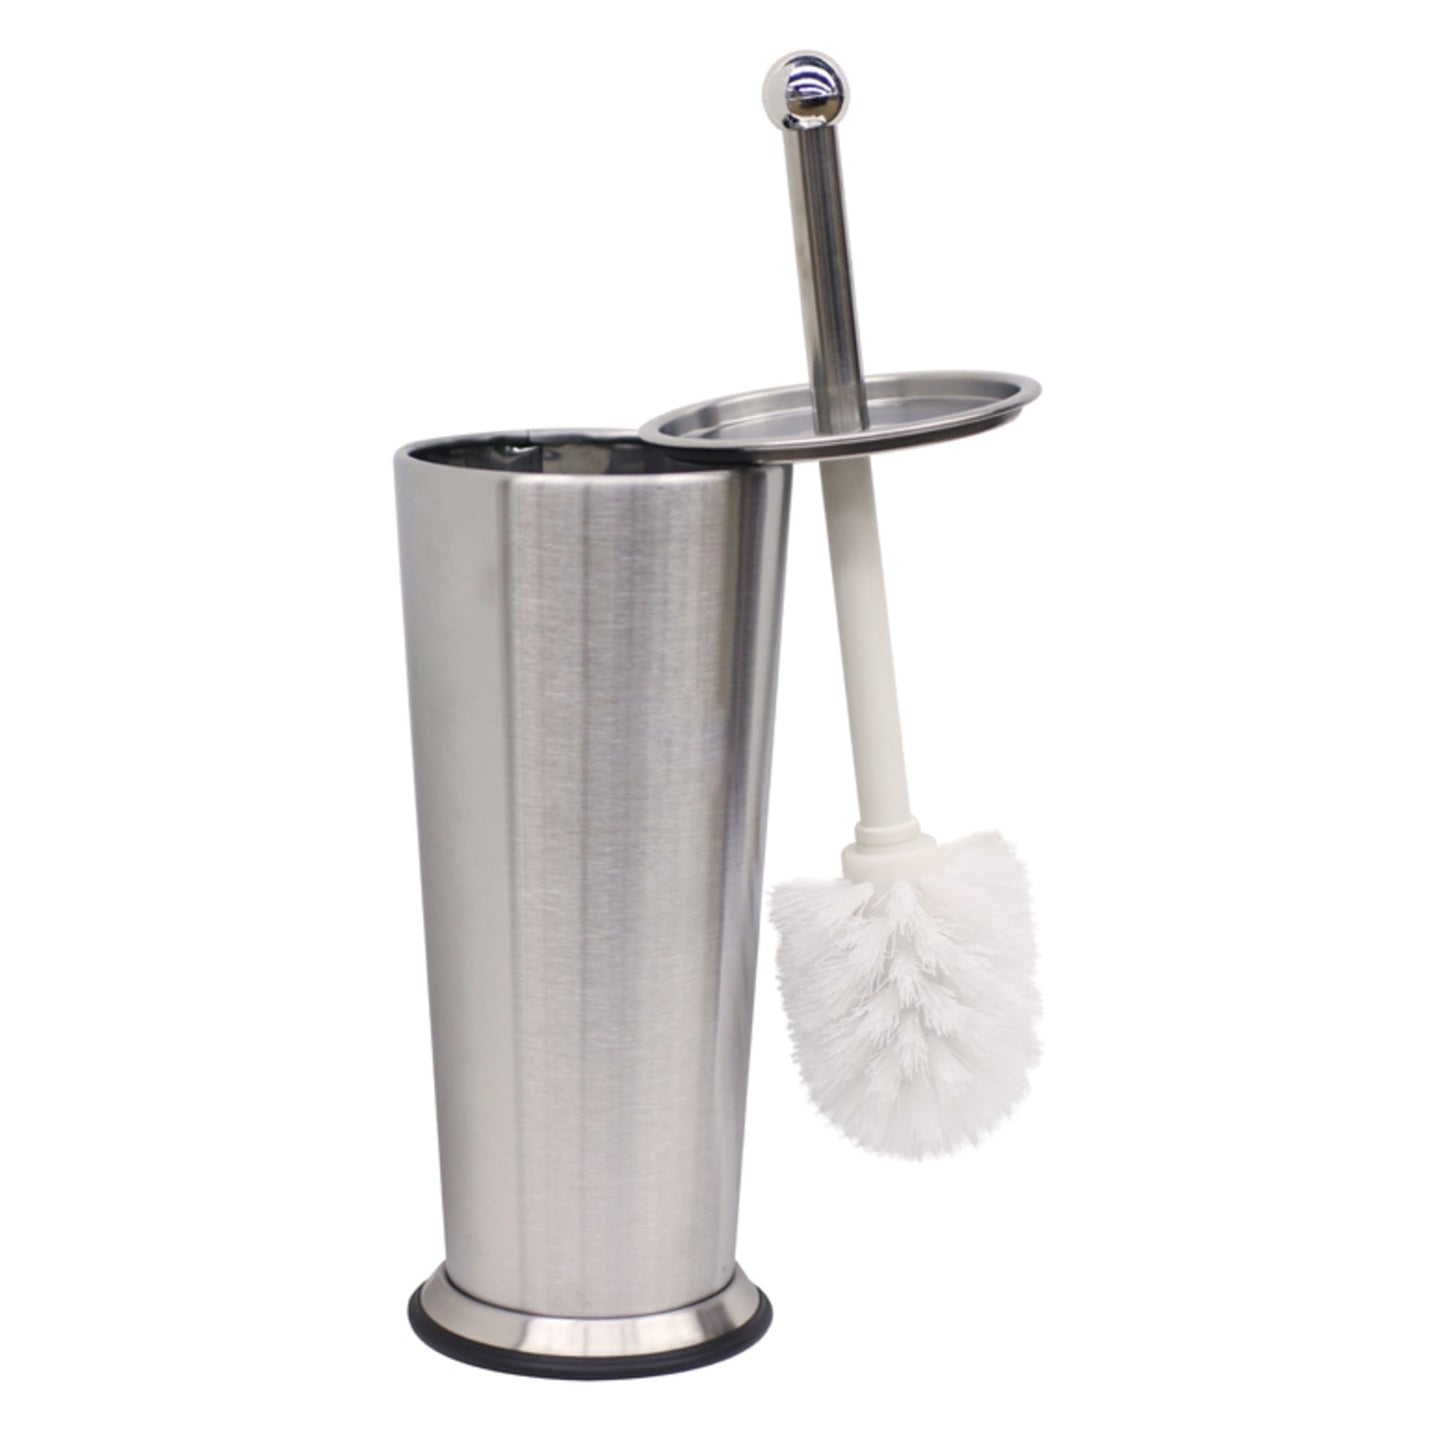 Brushed Stainless Steel Tapered Toilet Brush